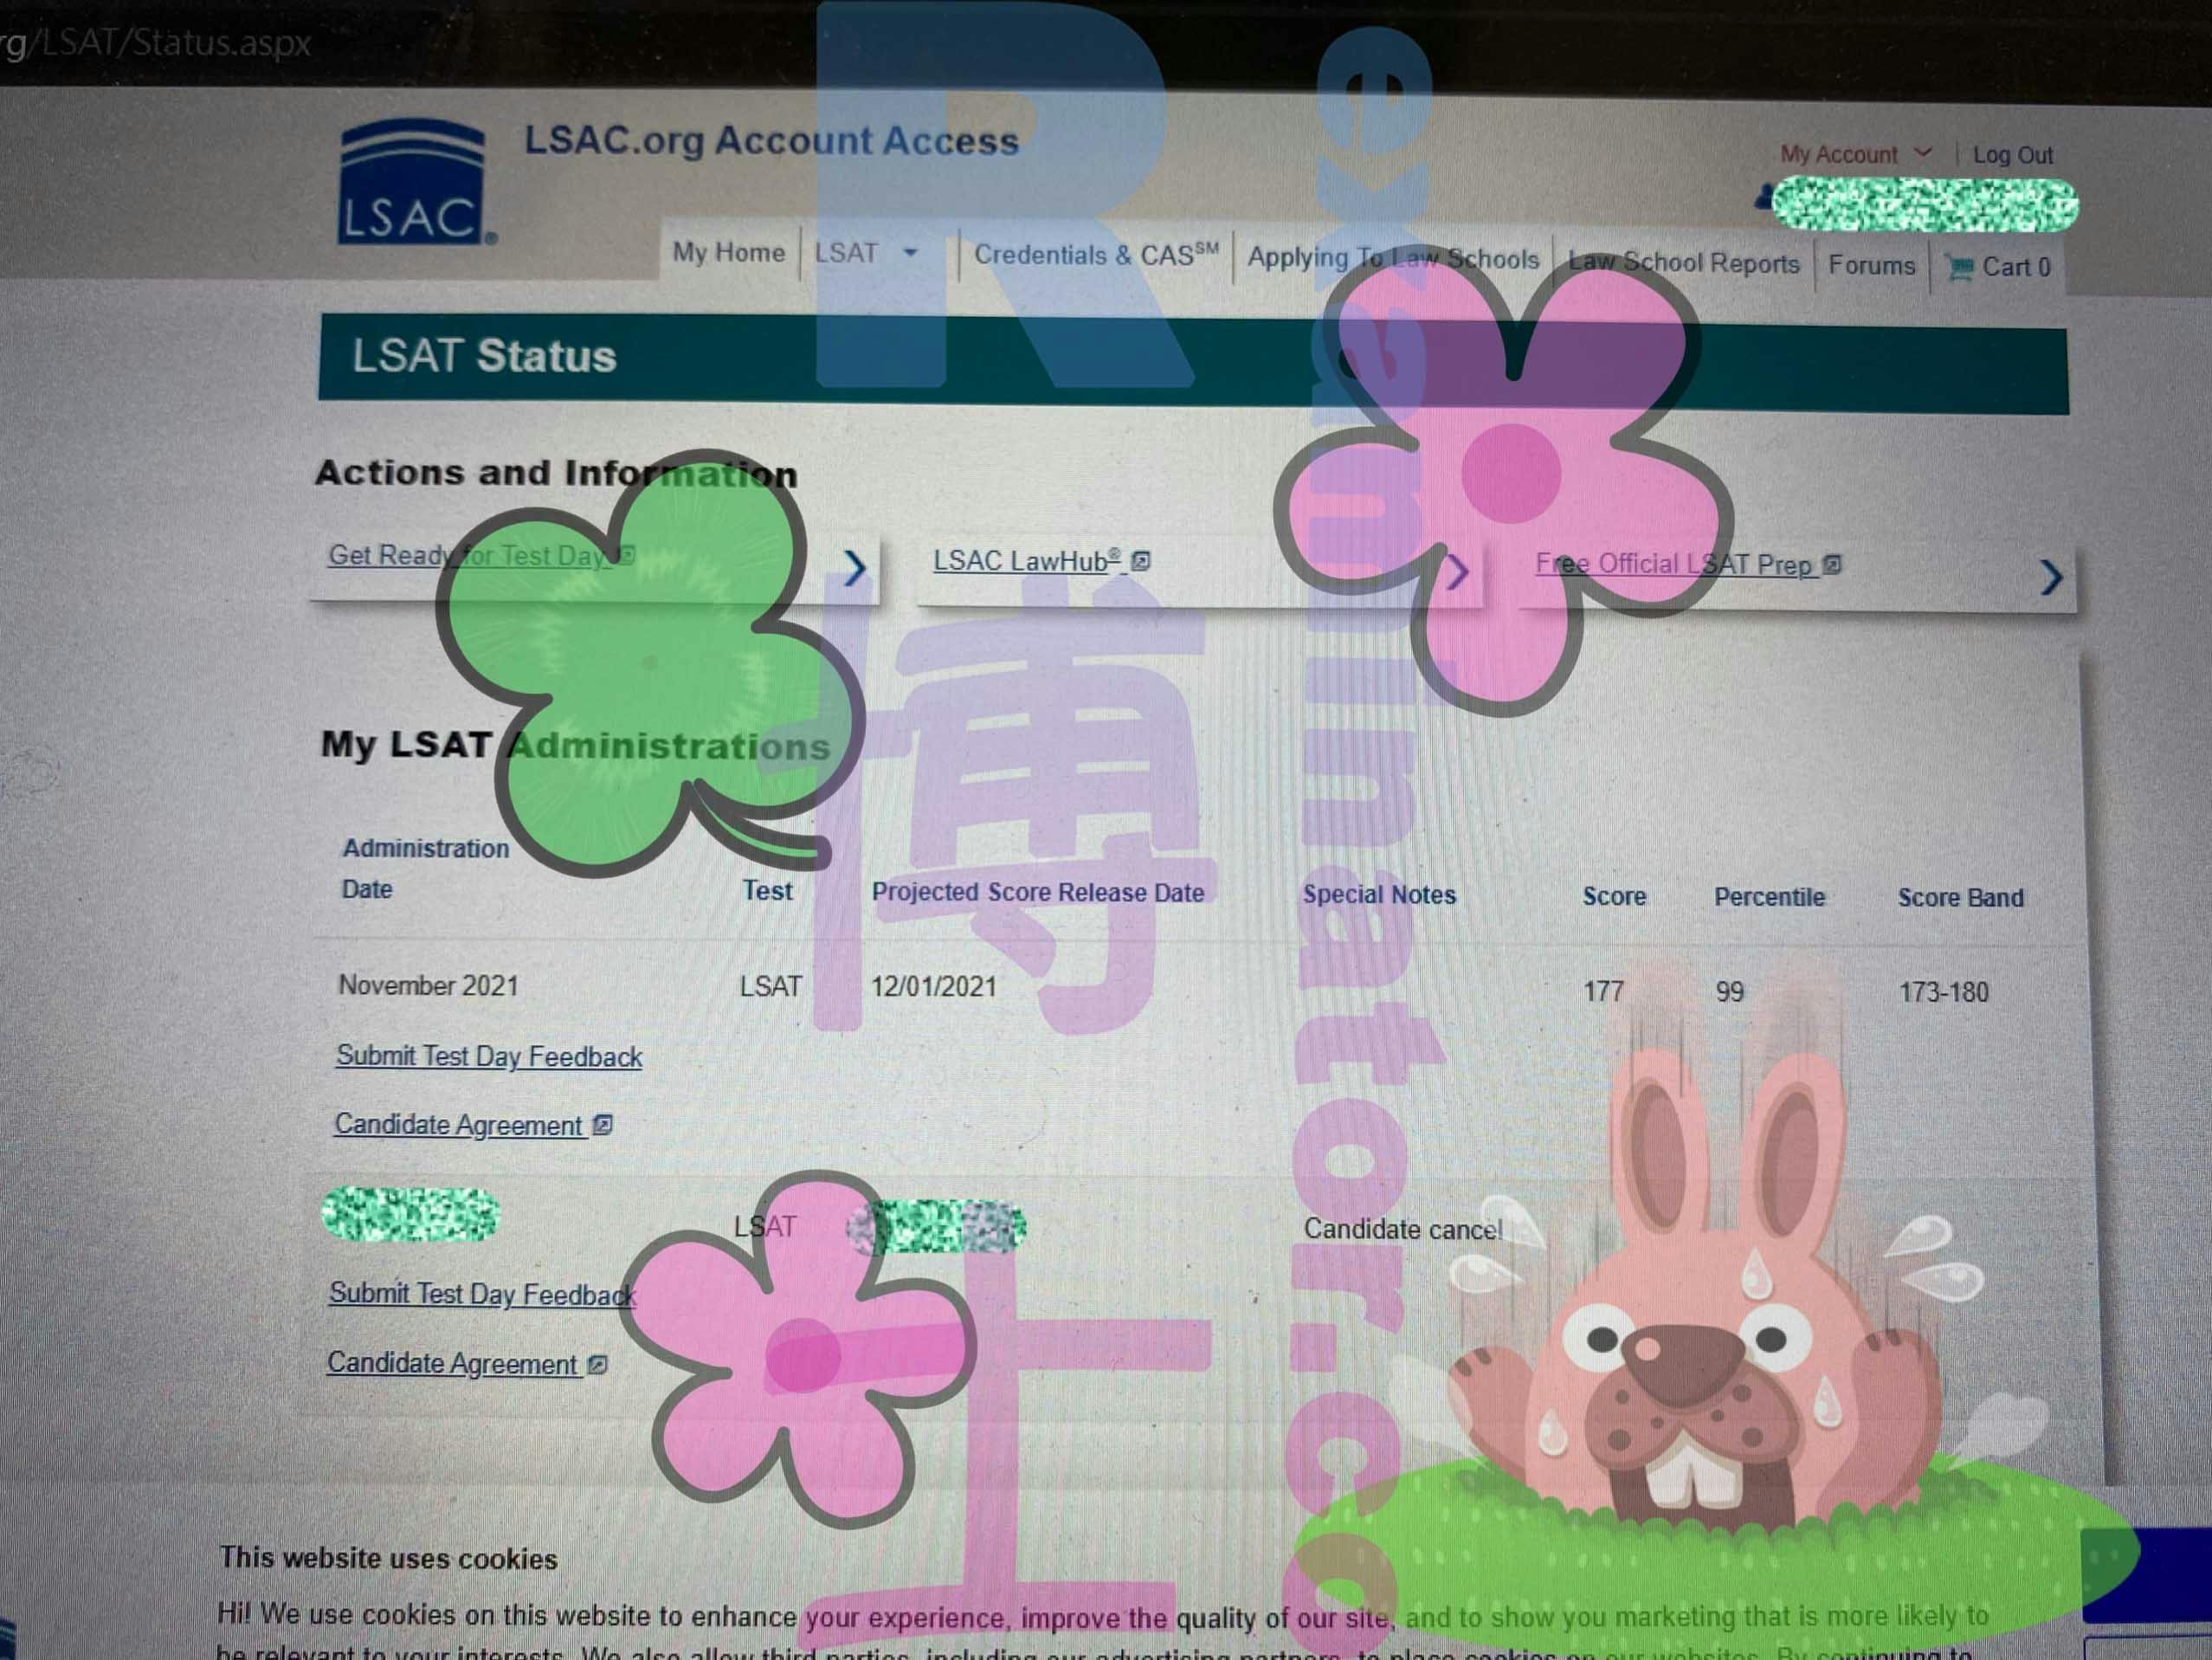 177 on the LSAT despite connection issues during the test!